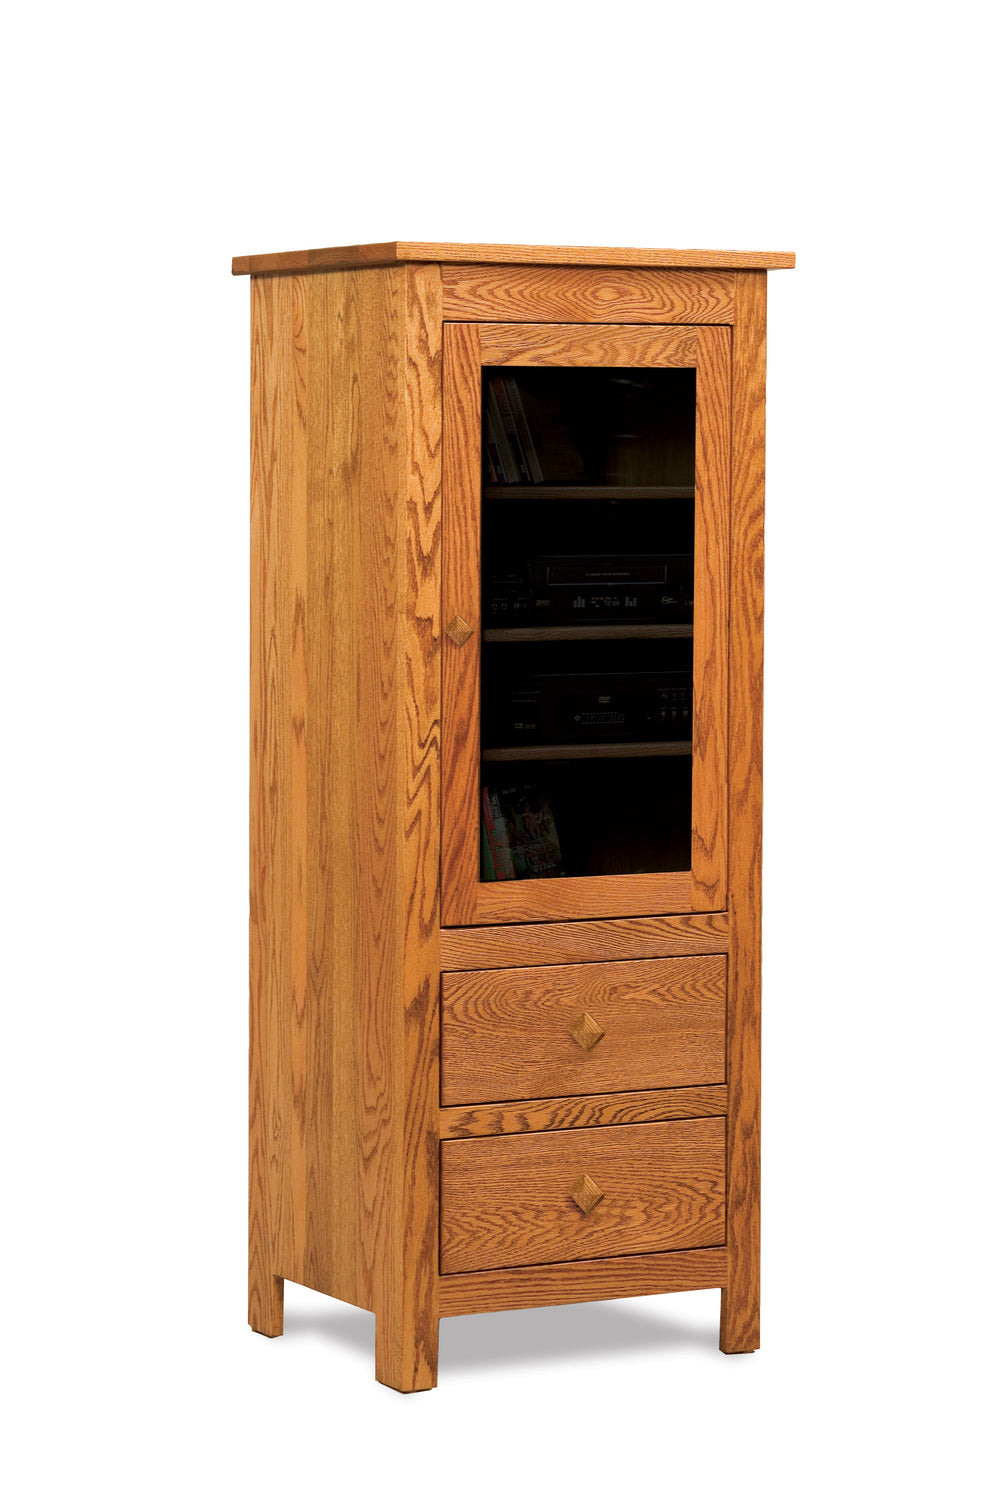 Amish Mission Stereo Cabinet with One Door and Two Drawers